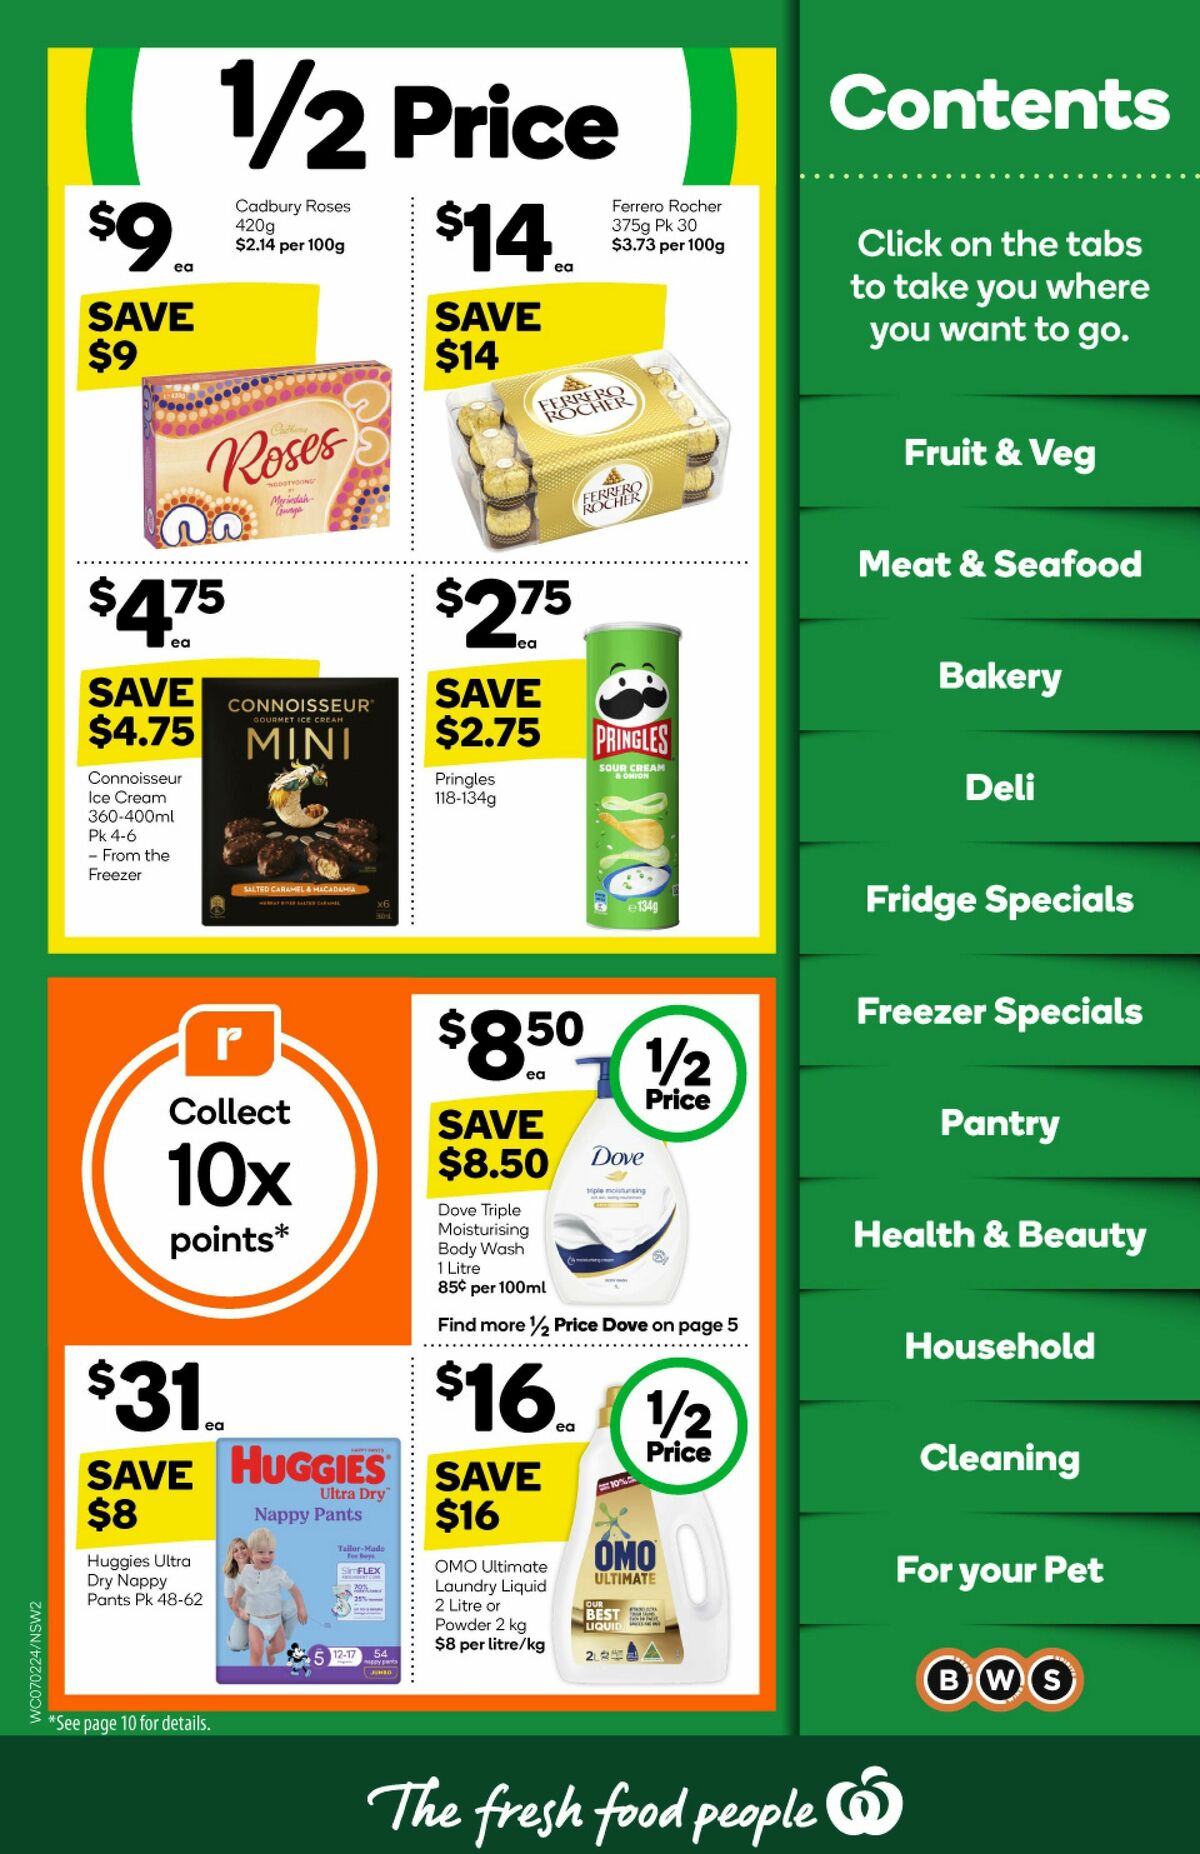 Woolworths Catalogues from 7 February